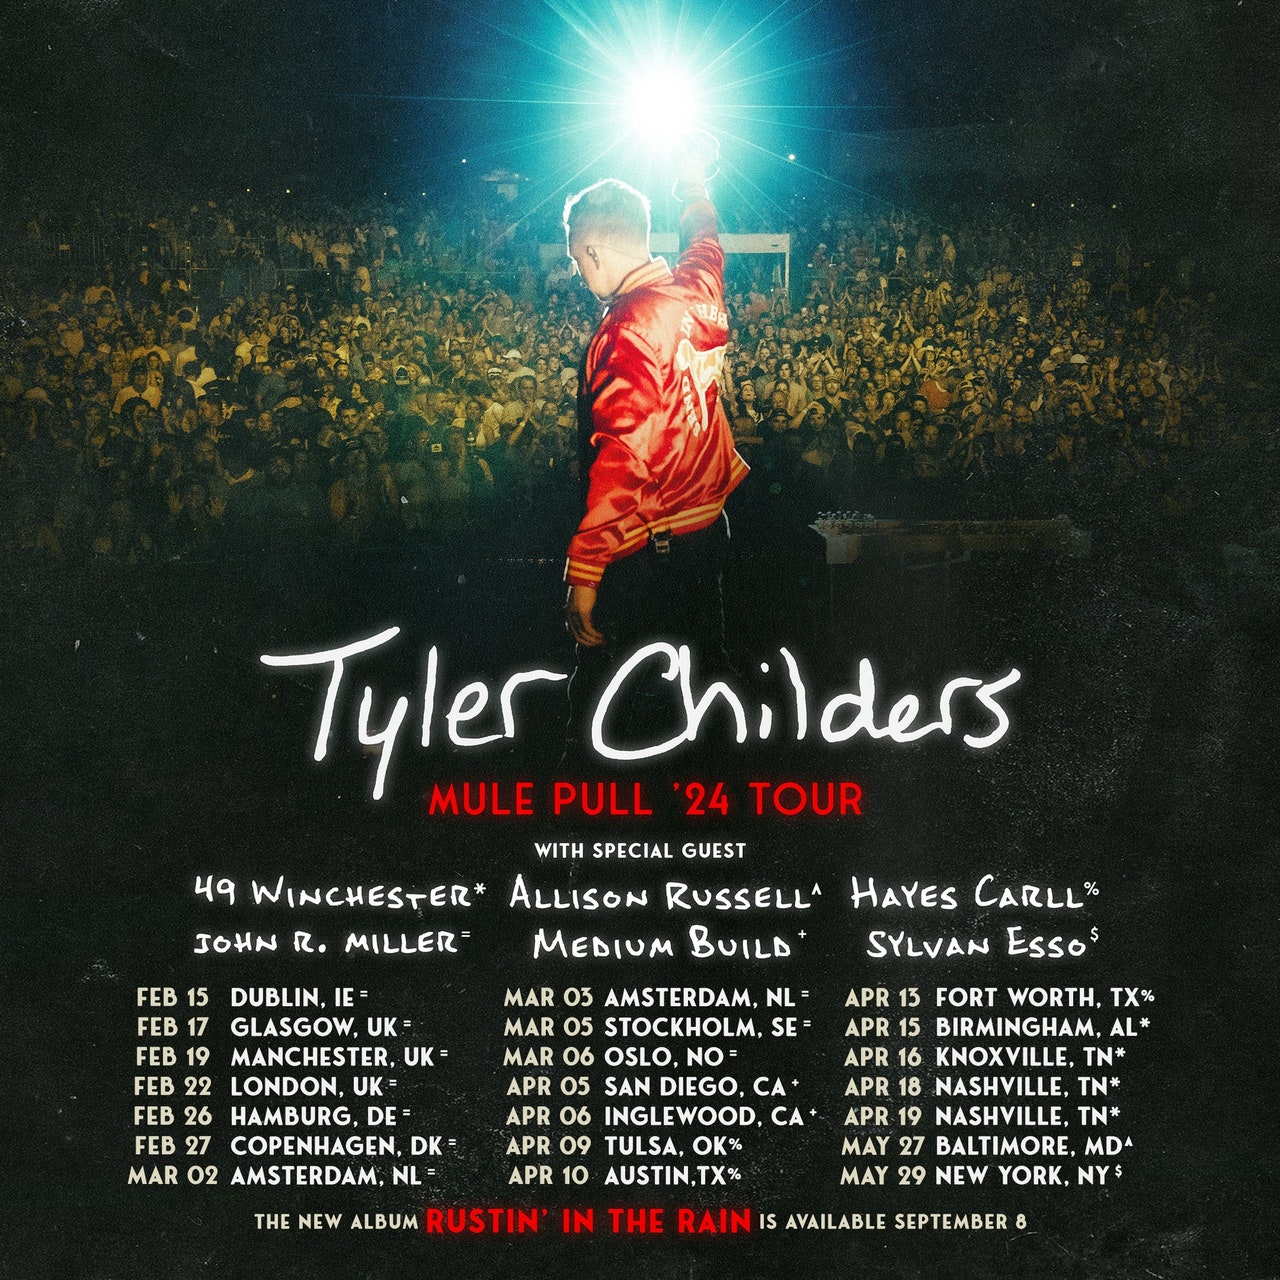 Tyler Childers: Mule Pull ’24 Tour